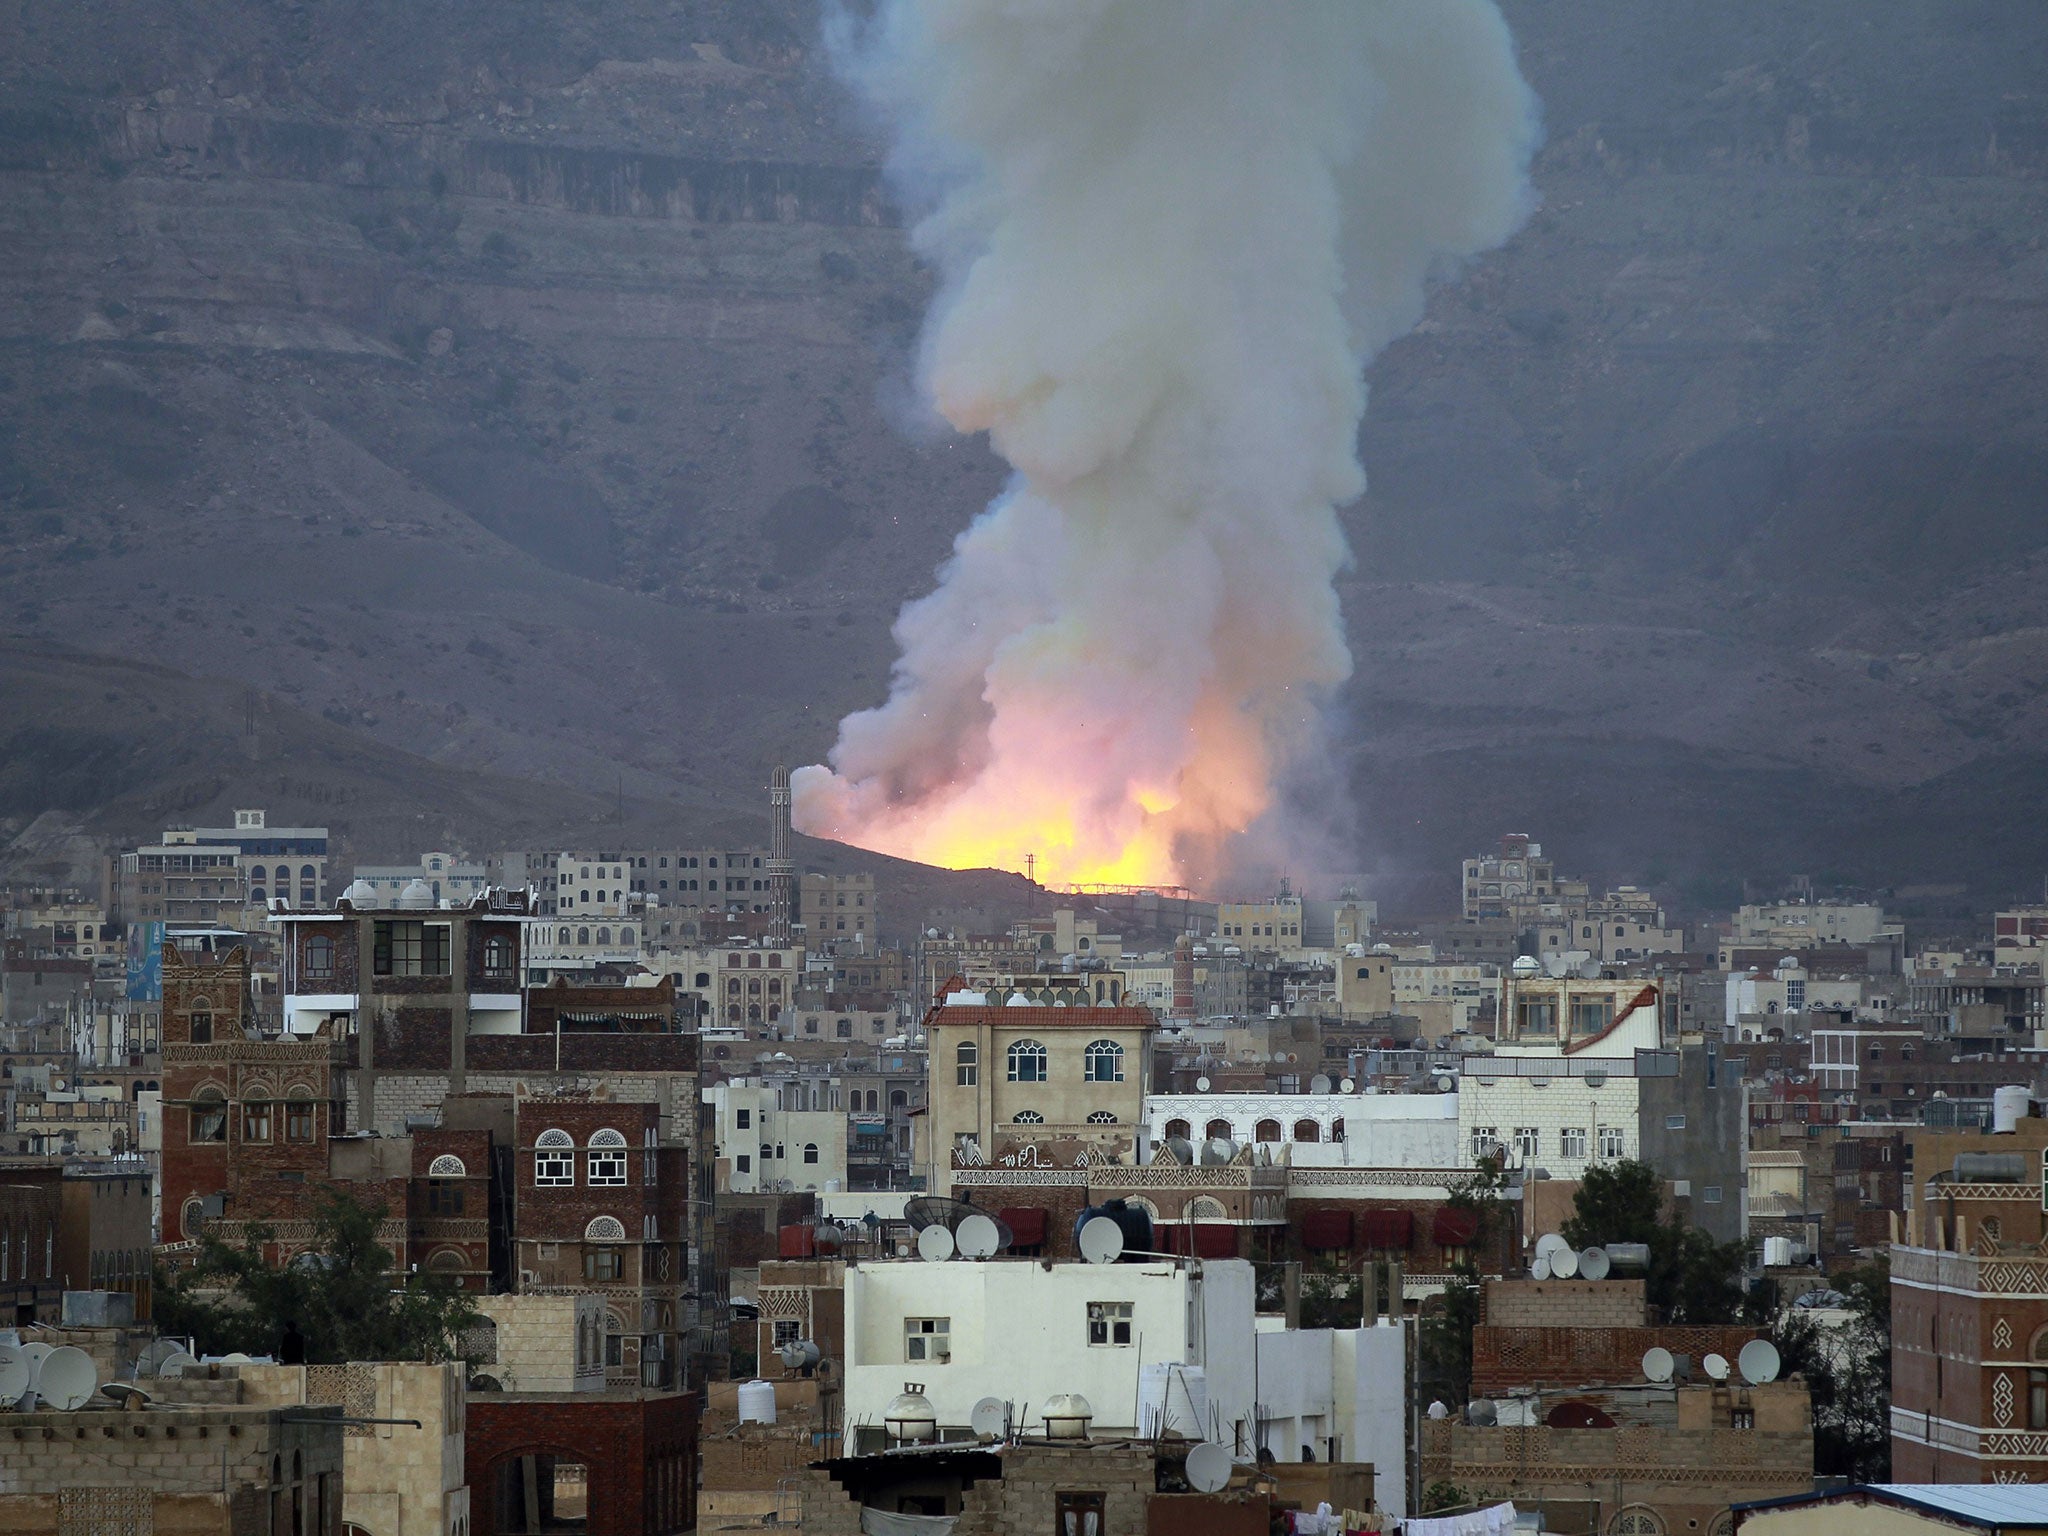 'The mother of all explosions in Yemen'